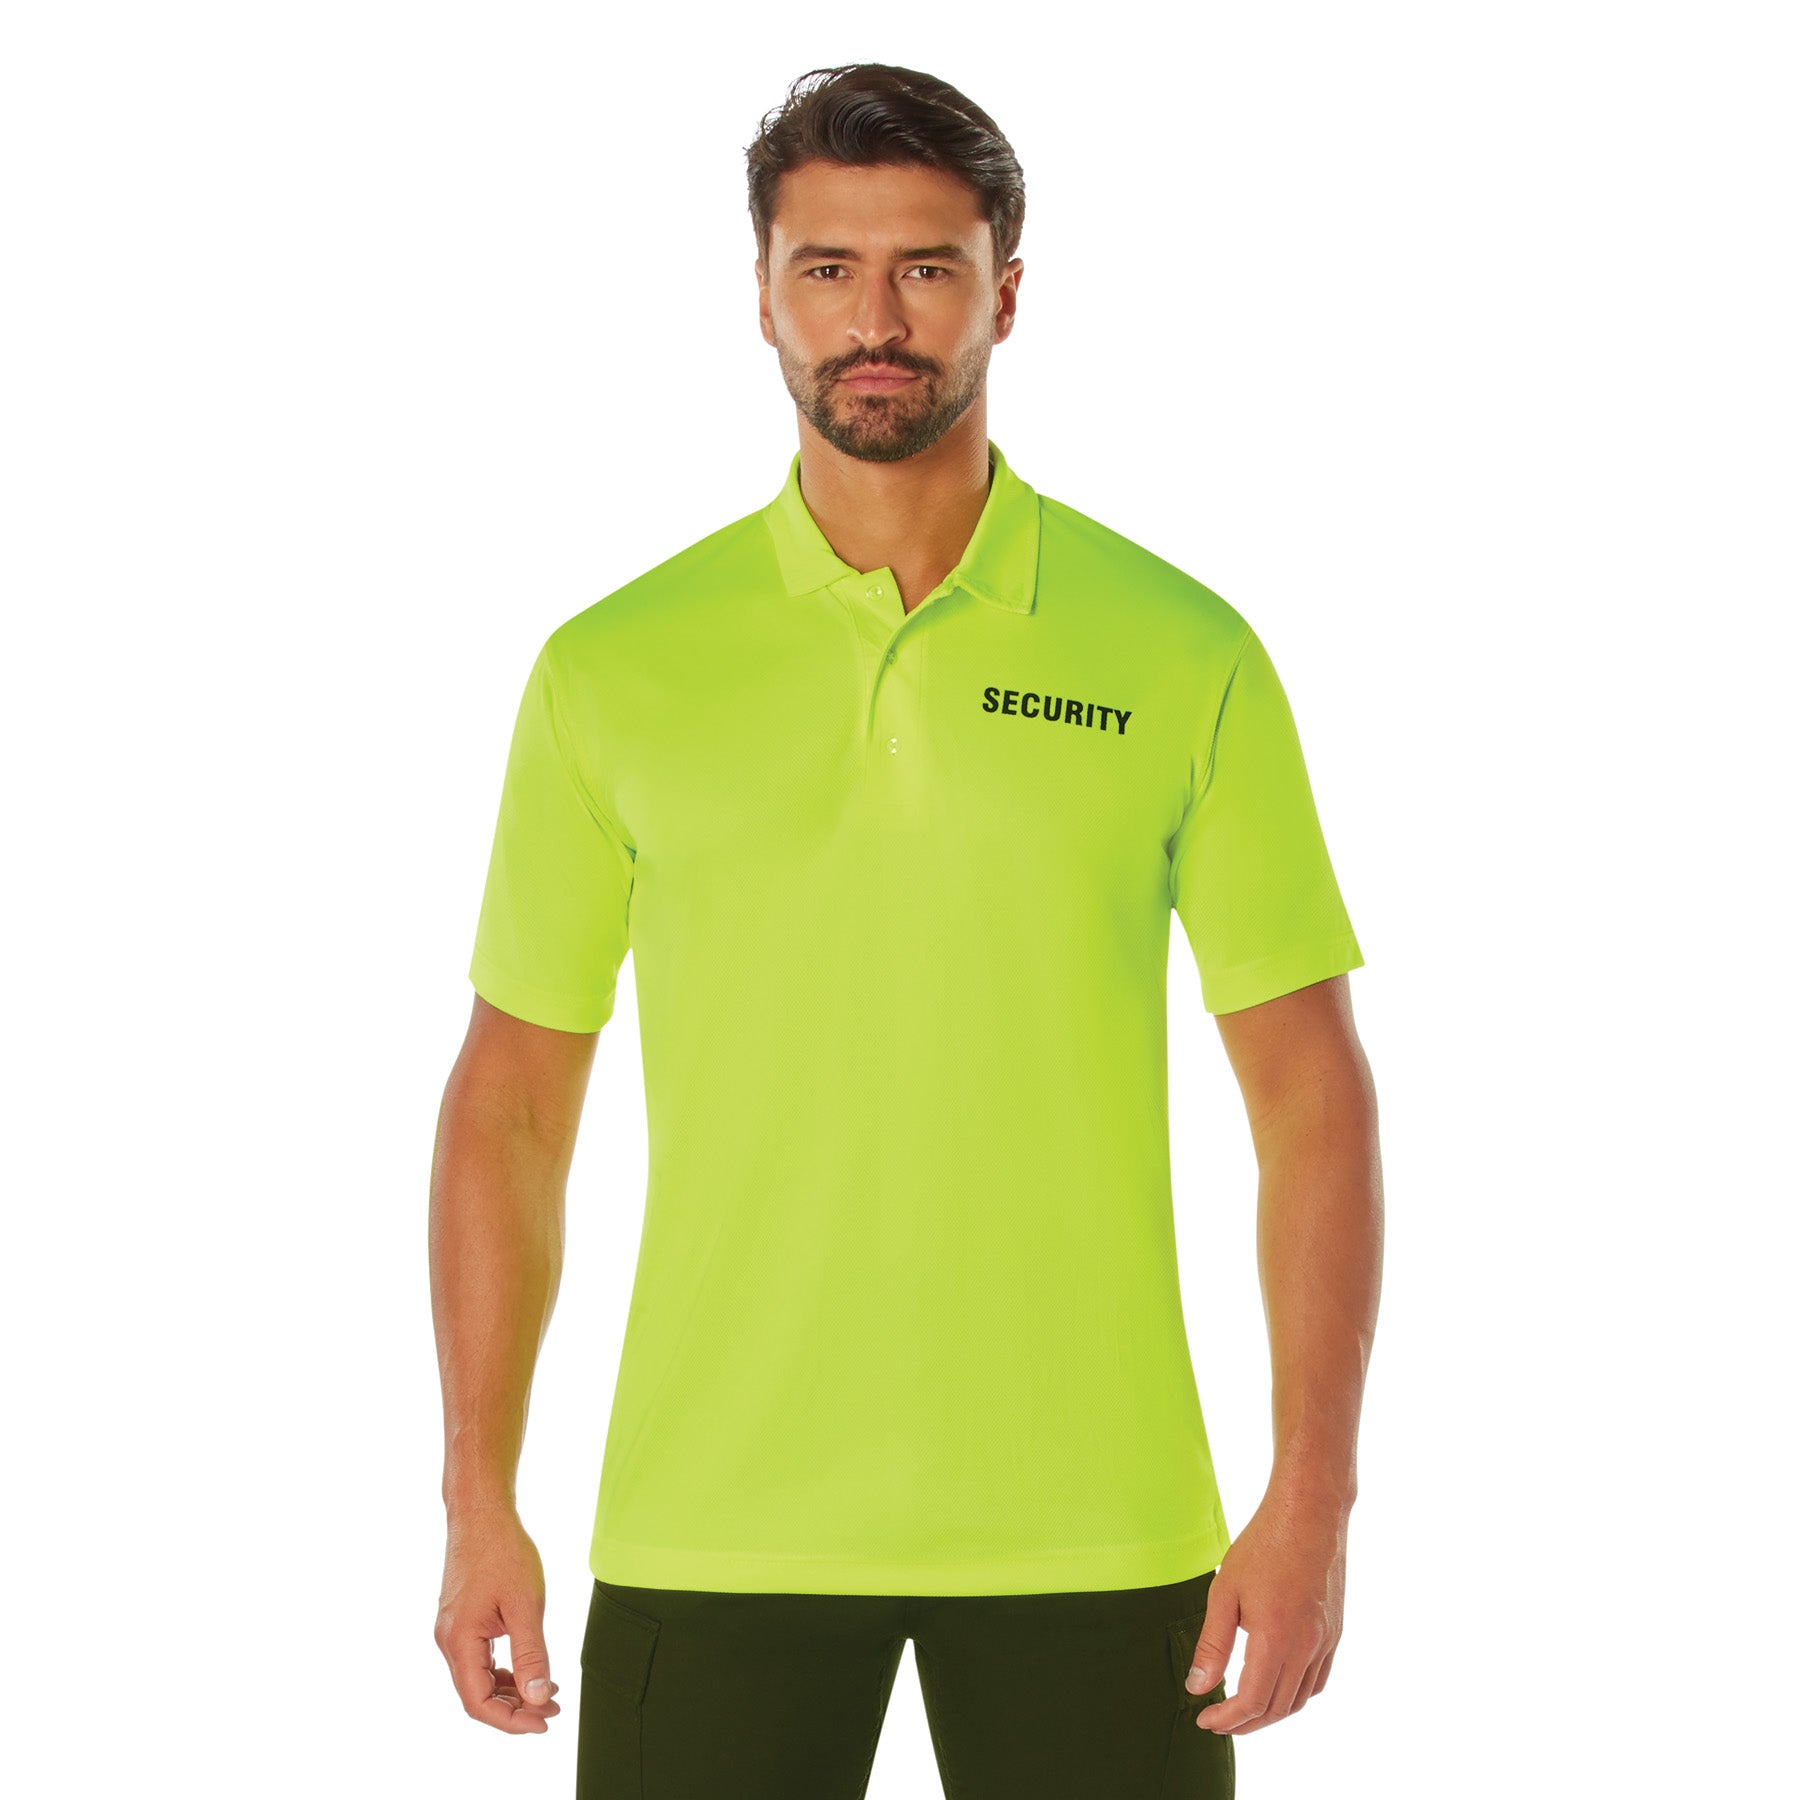 [Public Safety] Poly Moisture Wicking Security Polo T-Shirts Security Black - Safety Green